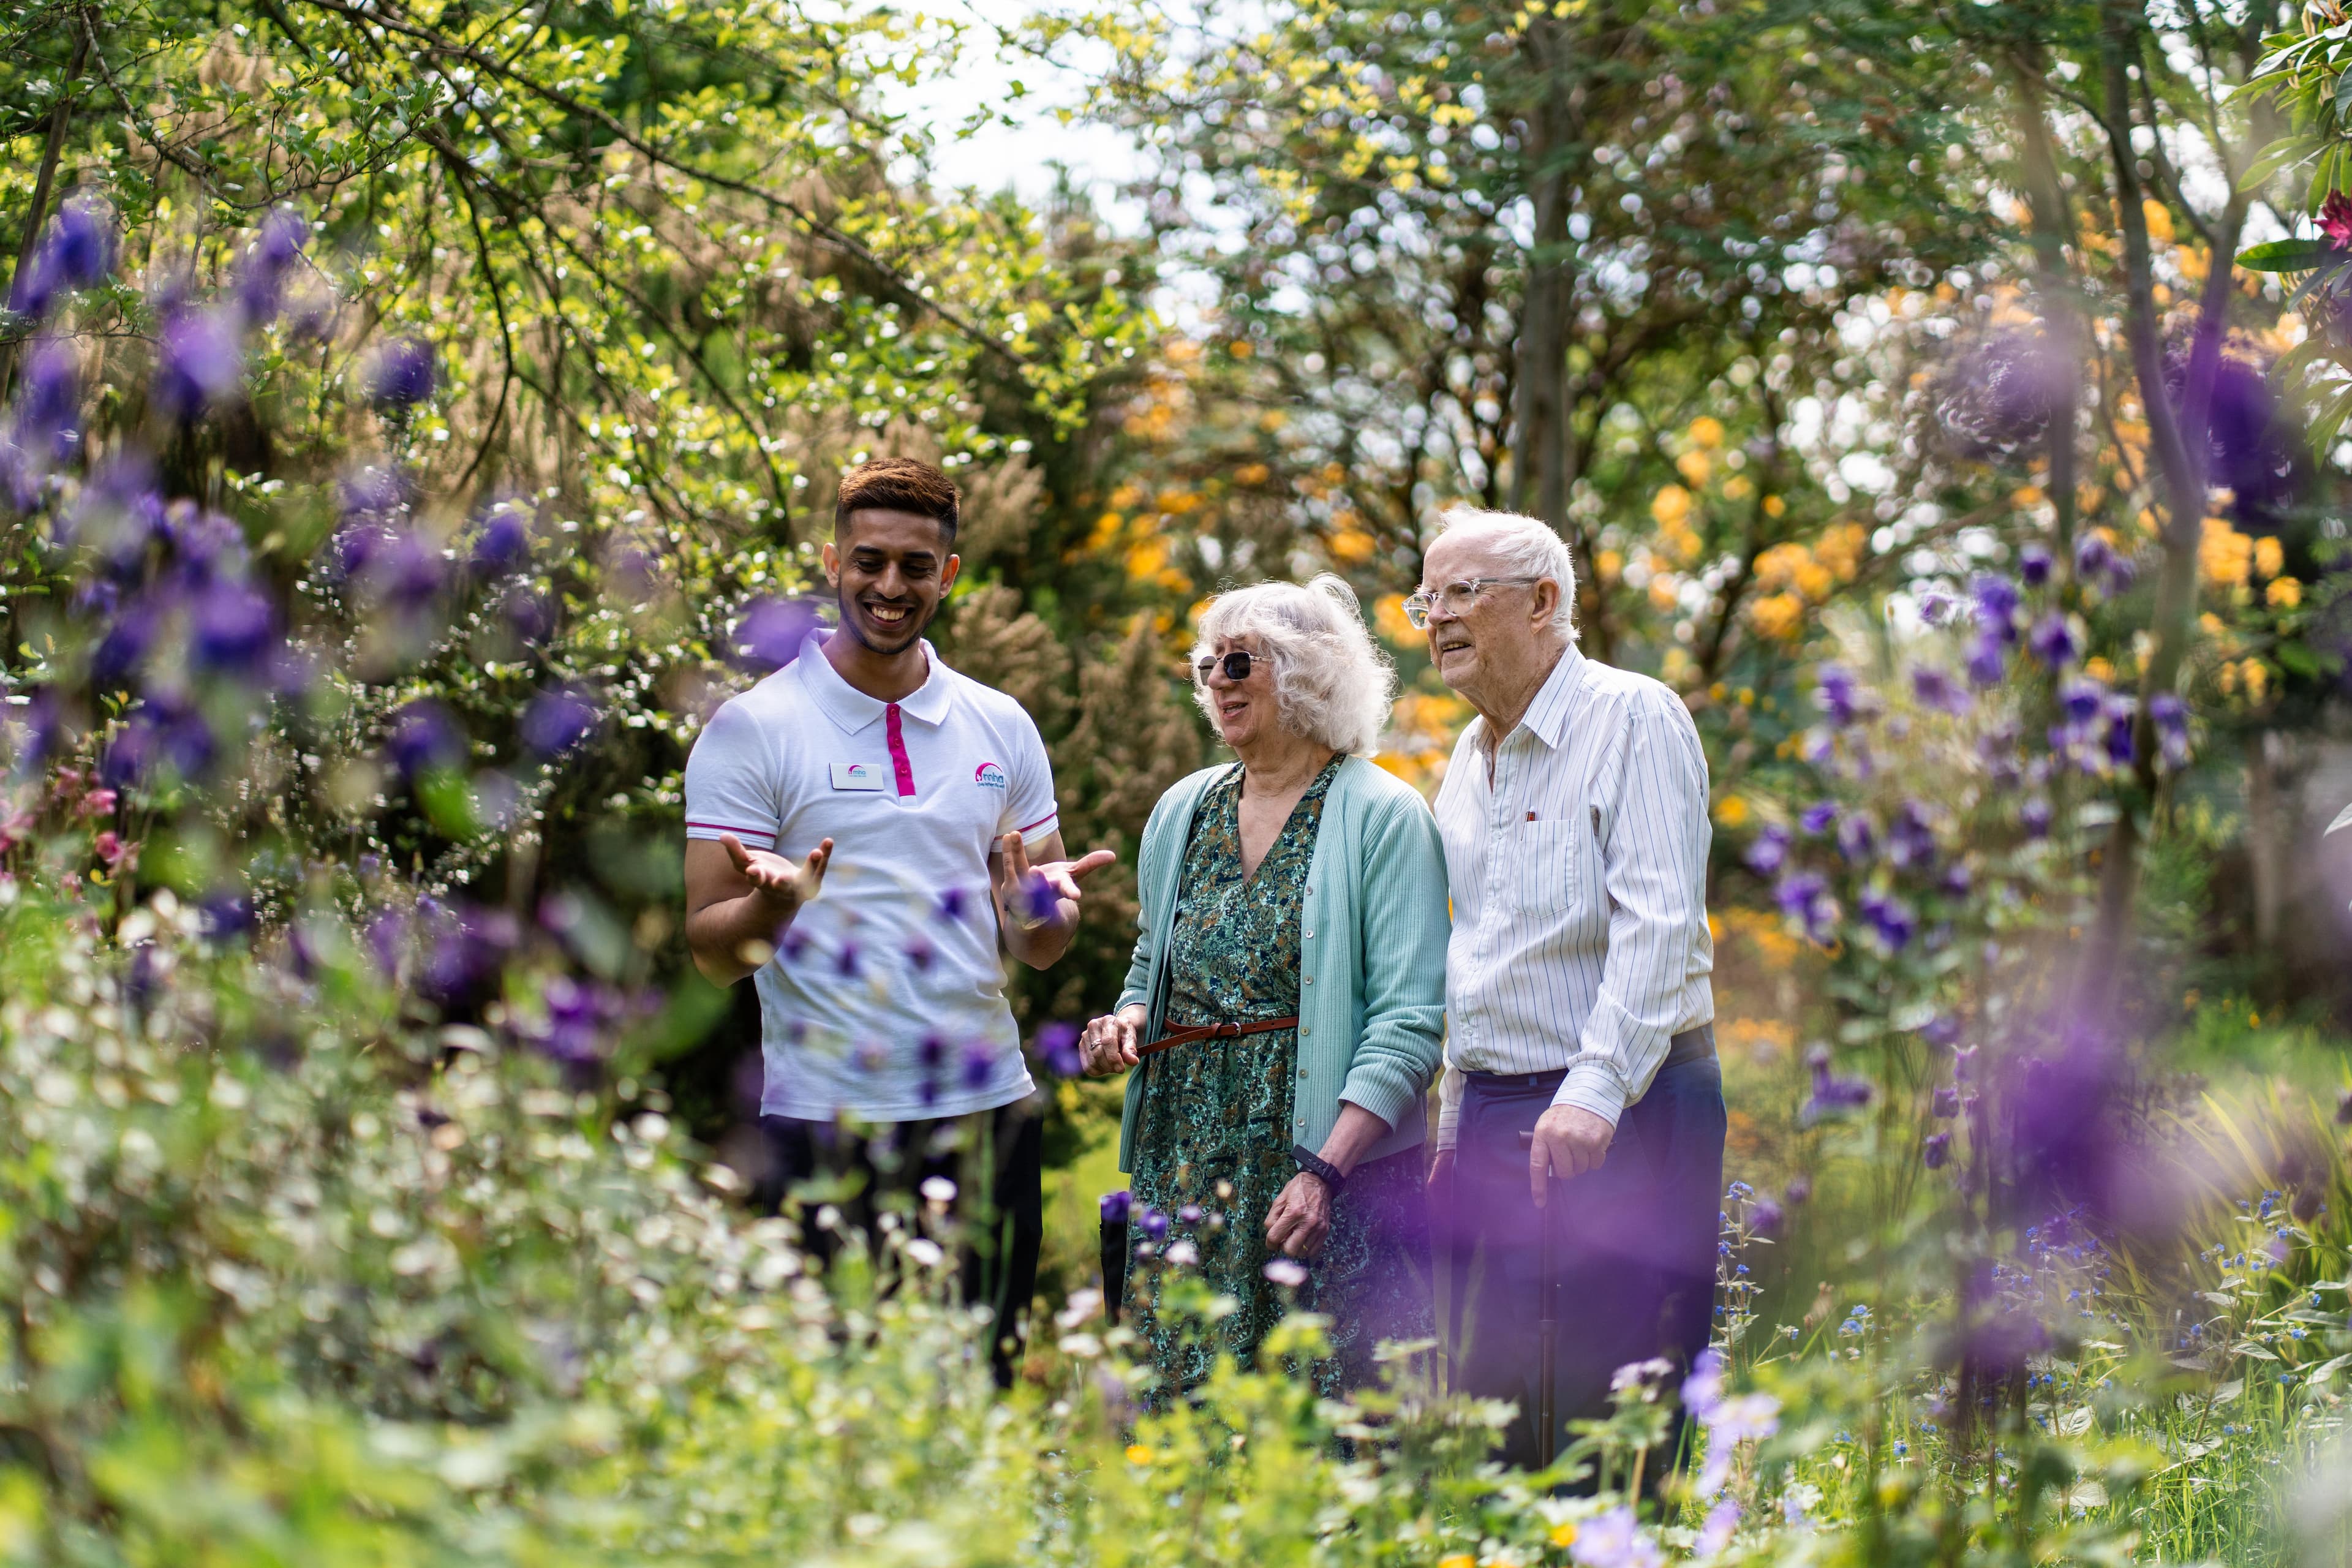 Elderly couple stood with younger man in a garden looking at the flowers together